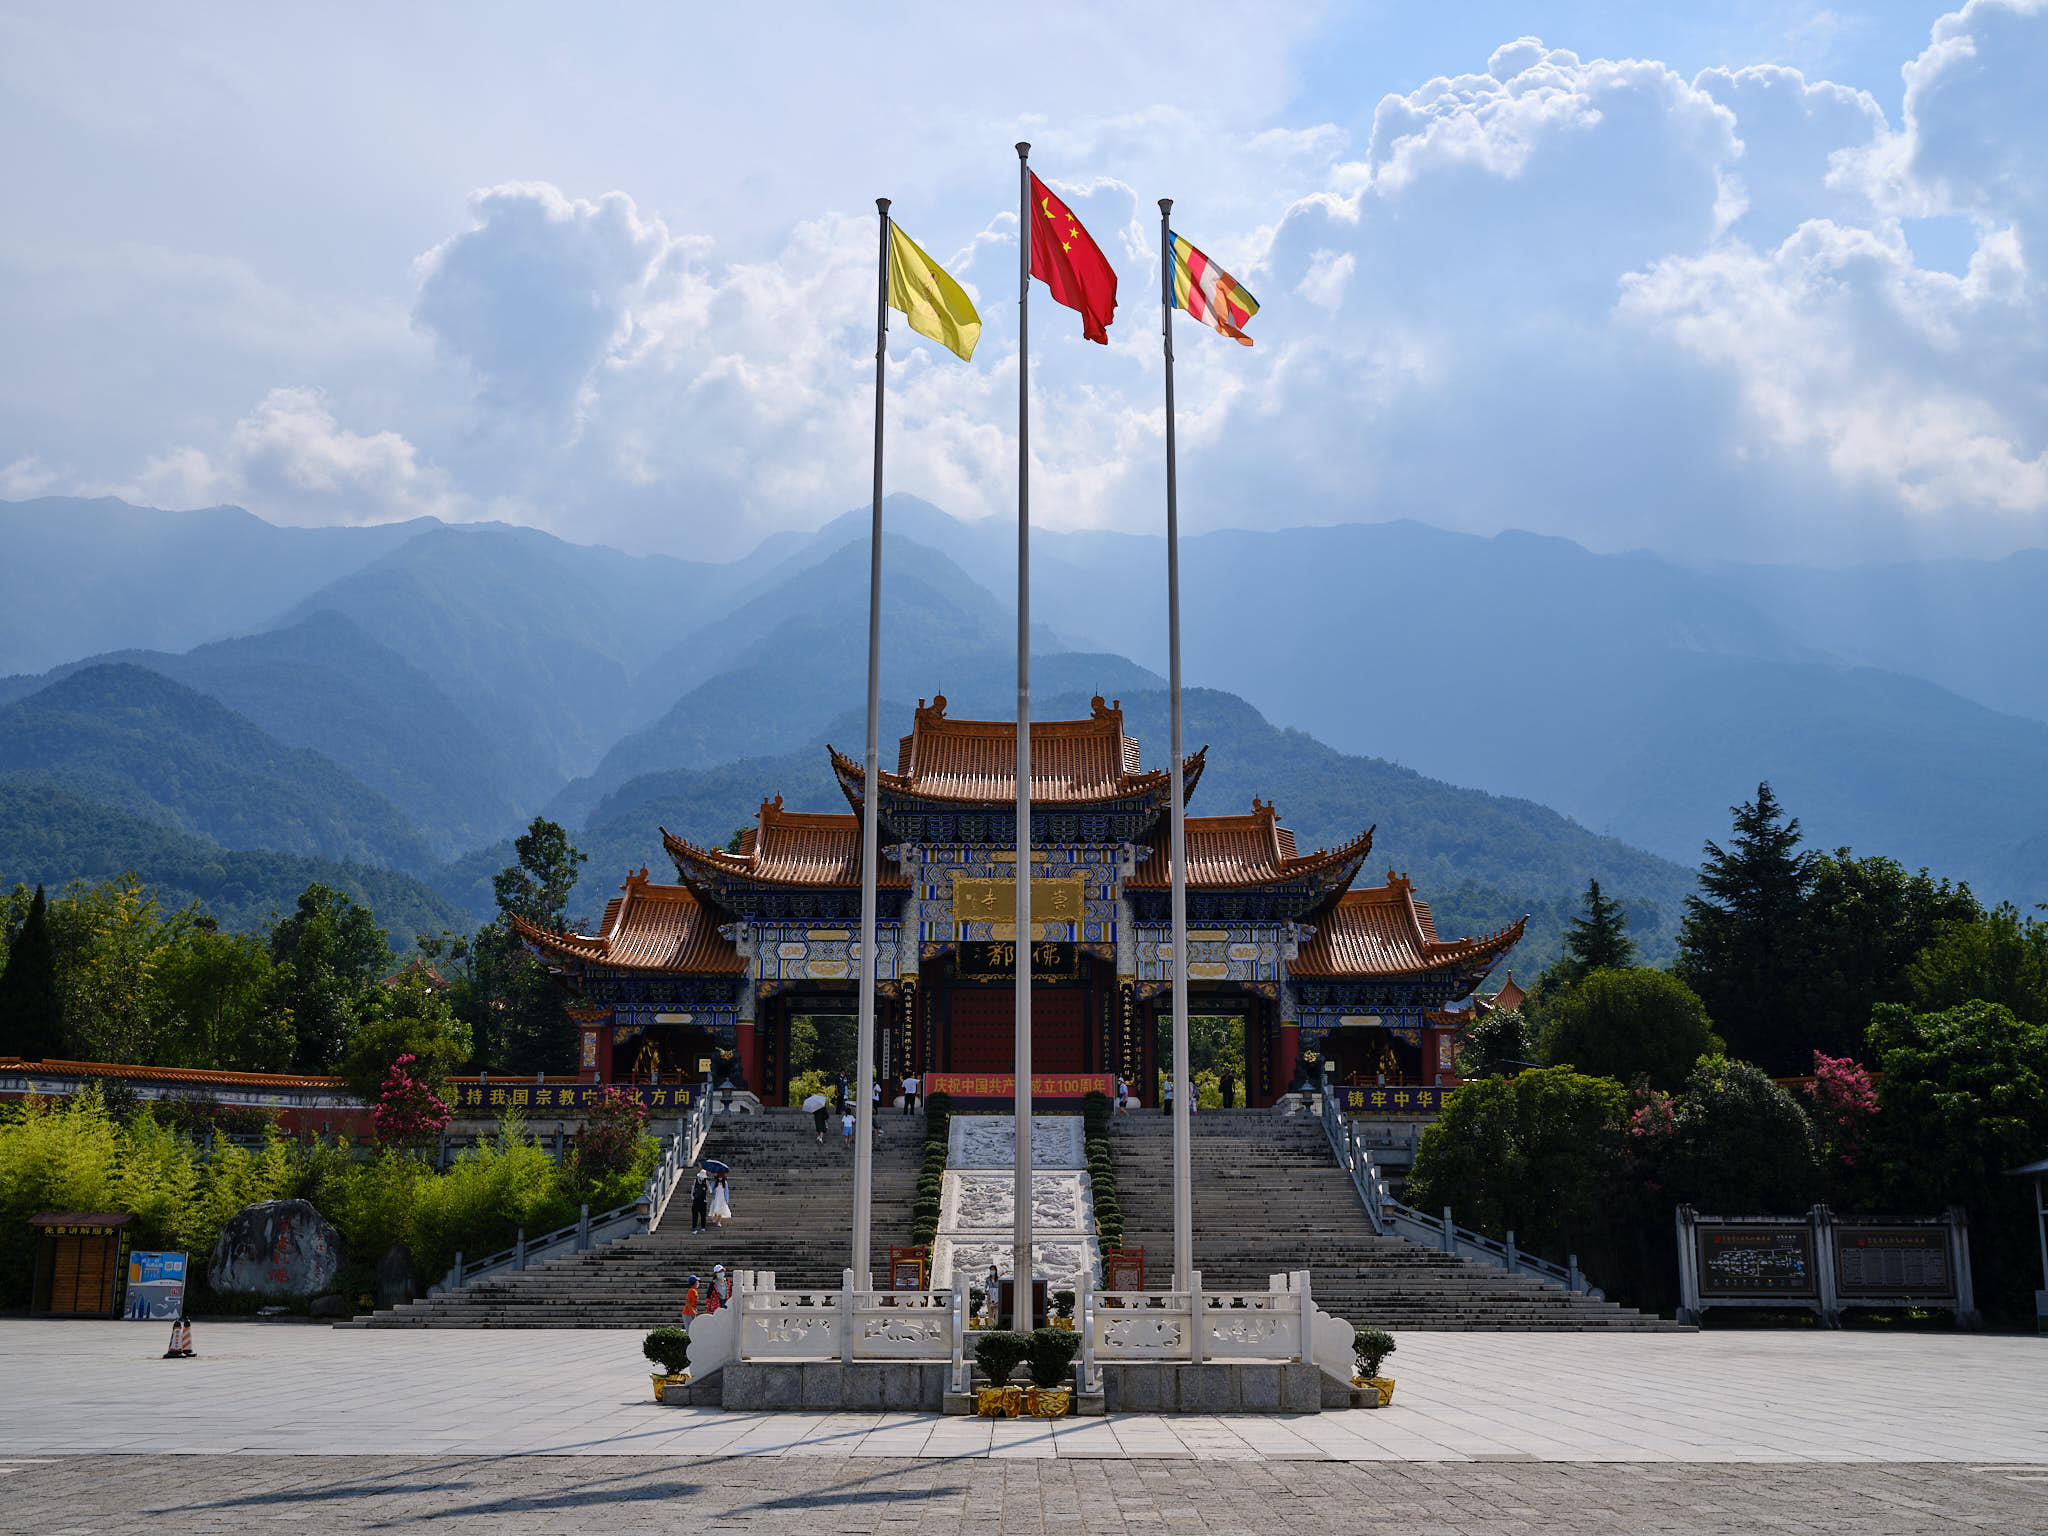 Cangshan Mountain temple with flags in the front and mountains in the back